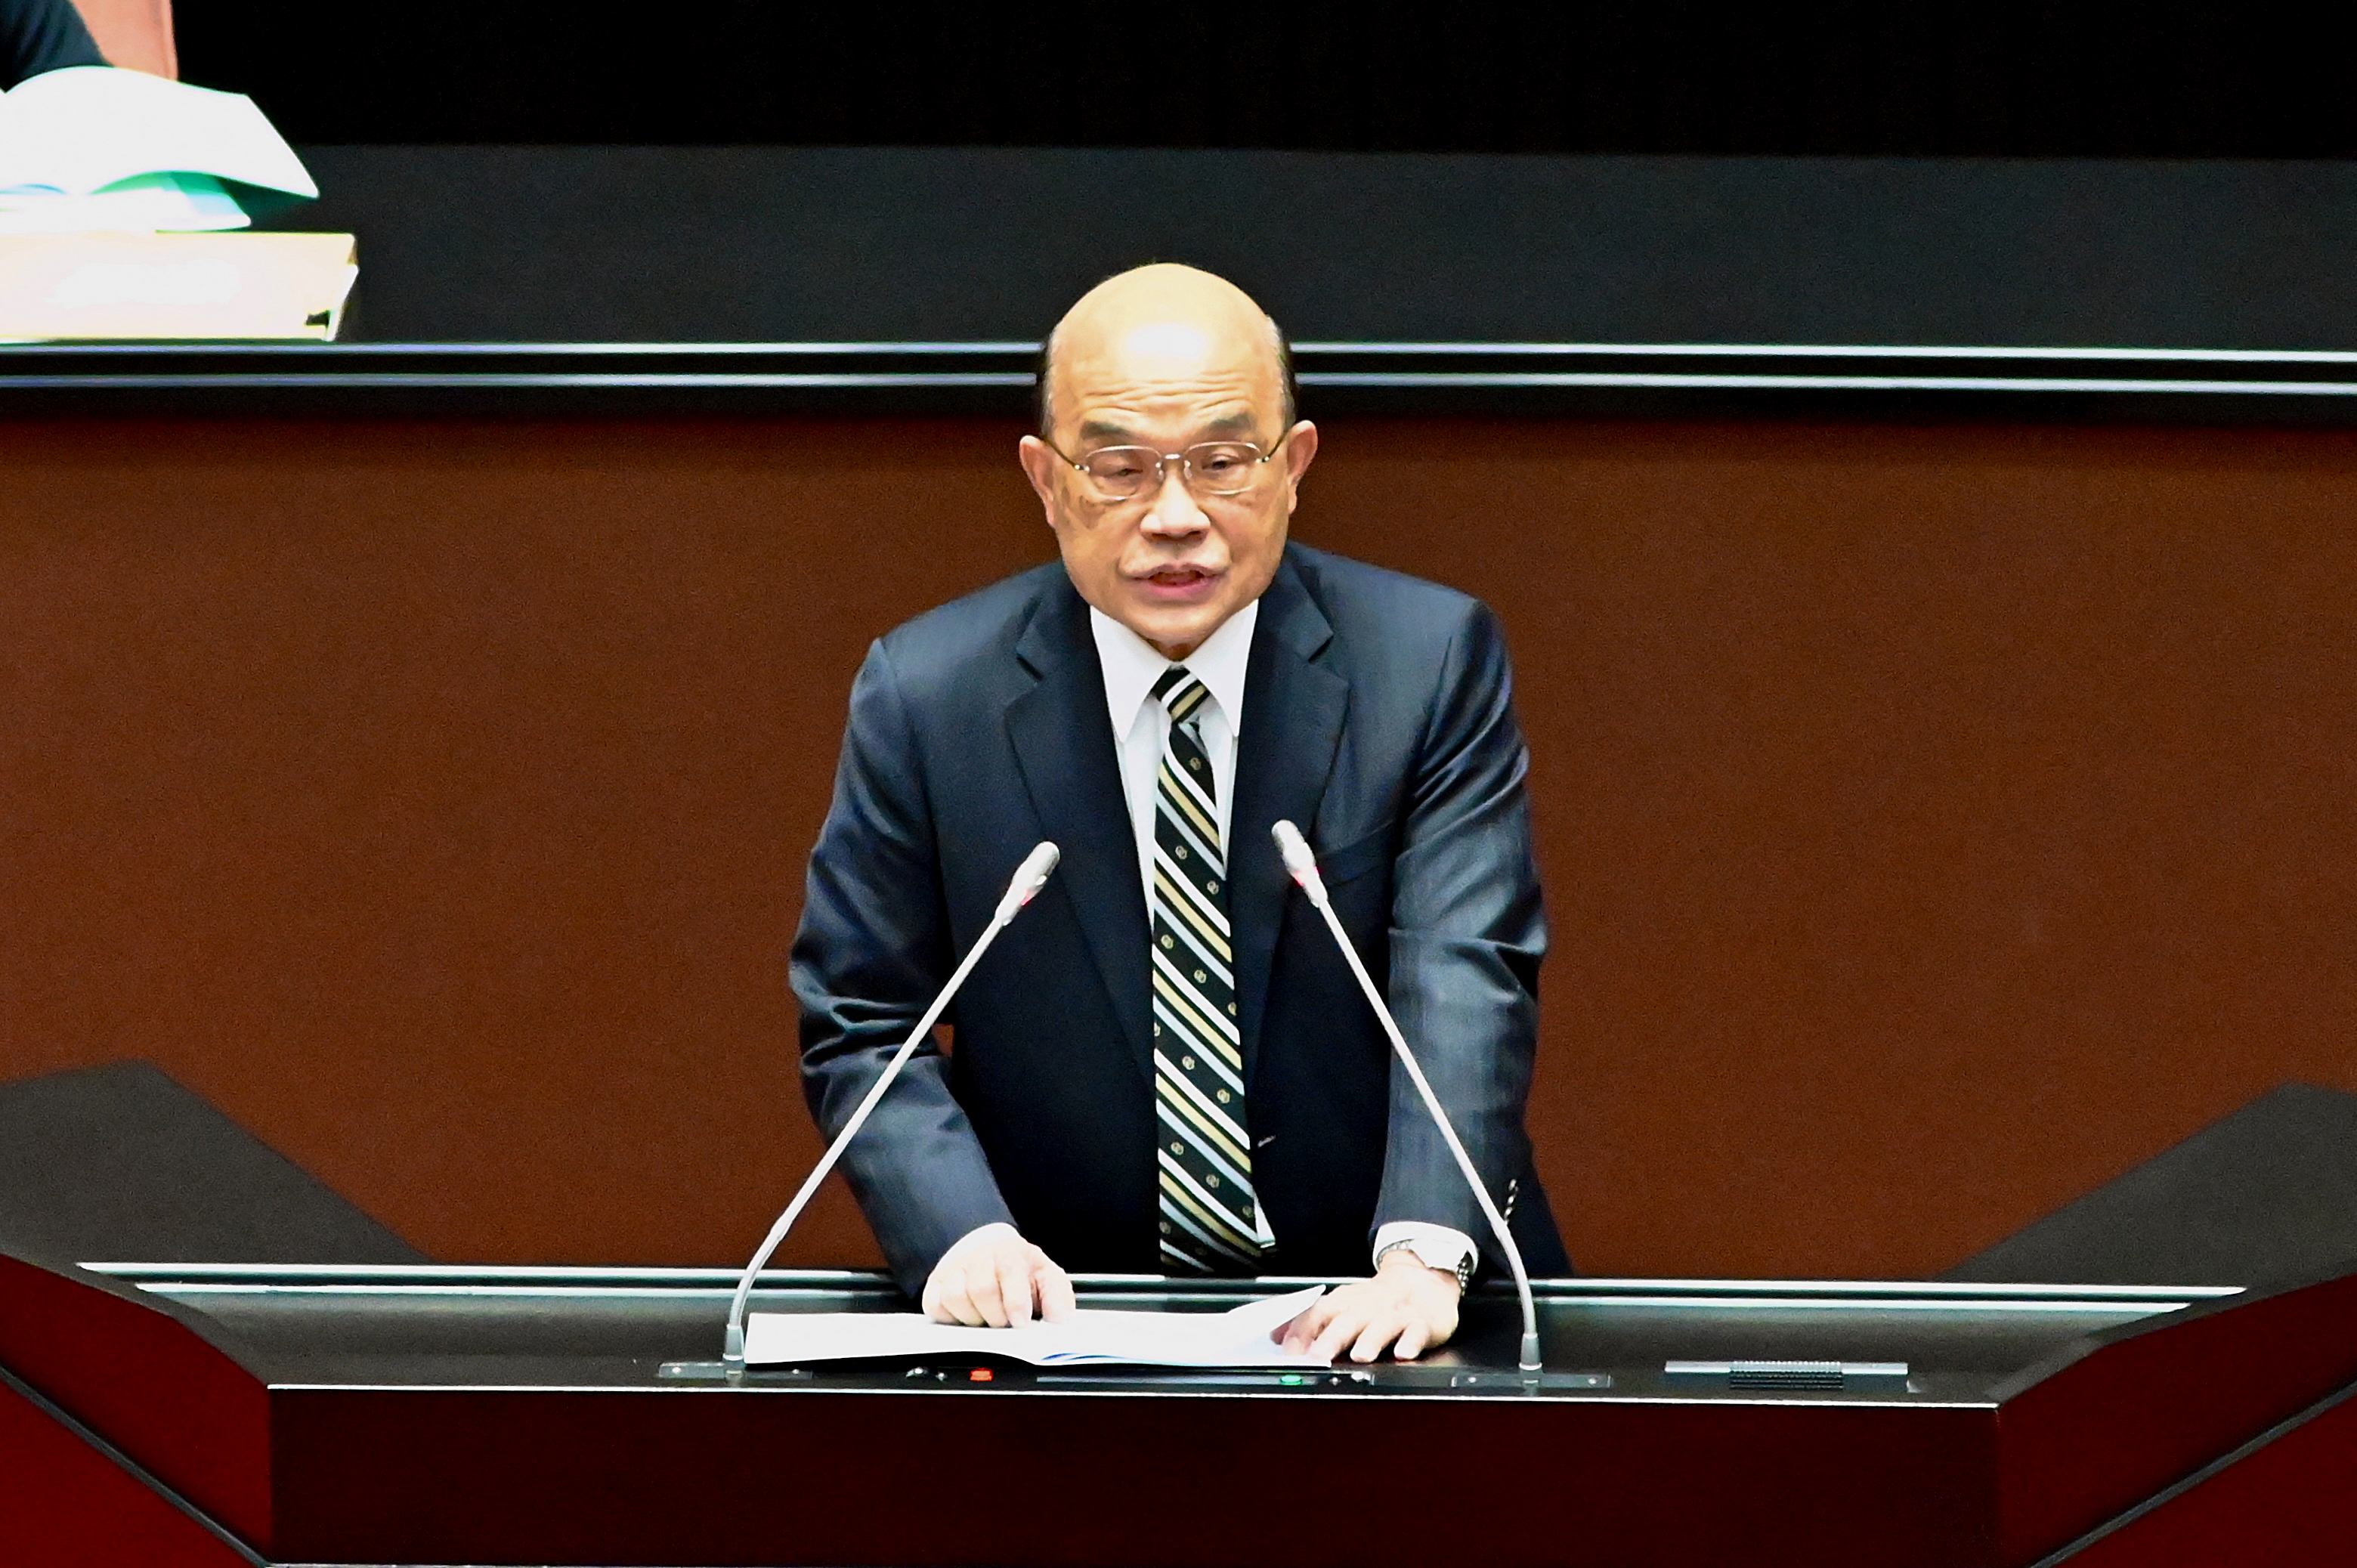 Taiwan's Premier Su Tseng-chang speaks during a session on the crisis between Russia and Ukraine, at the parliament in Taipei, Taiwan, on March 1.